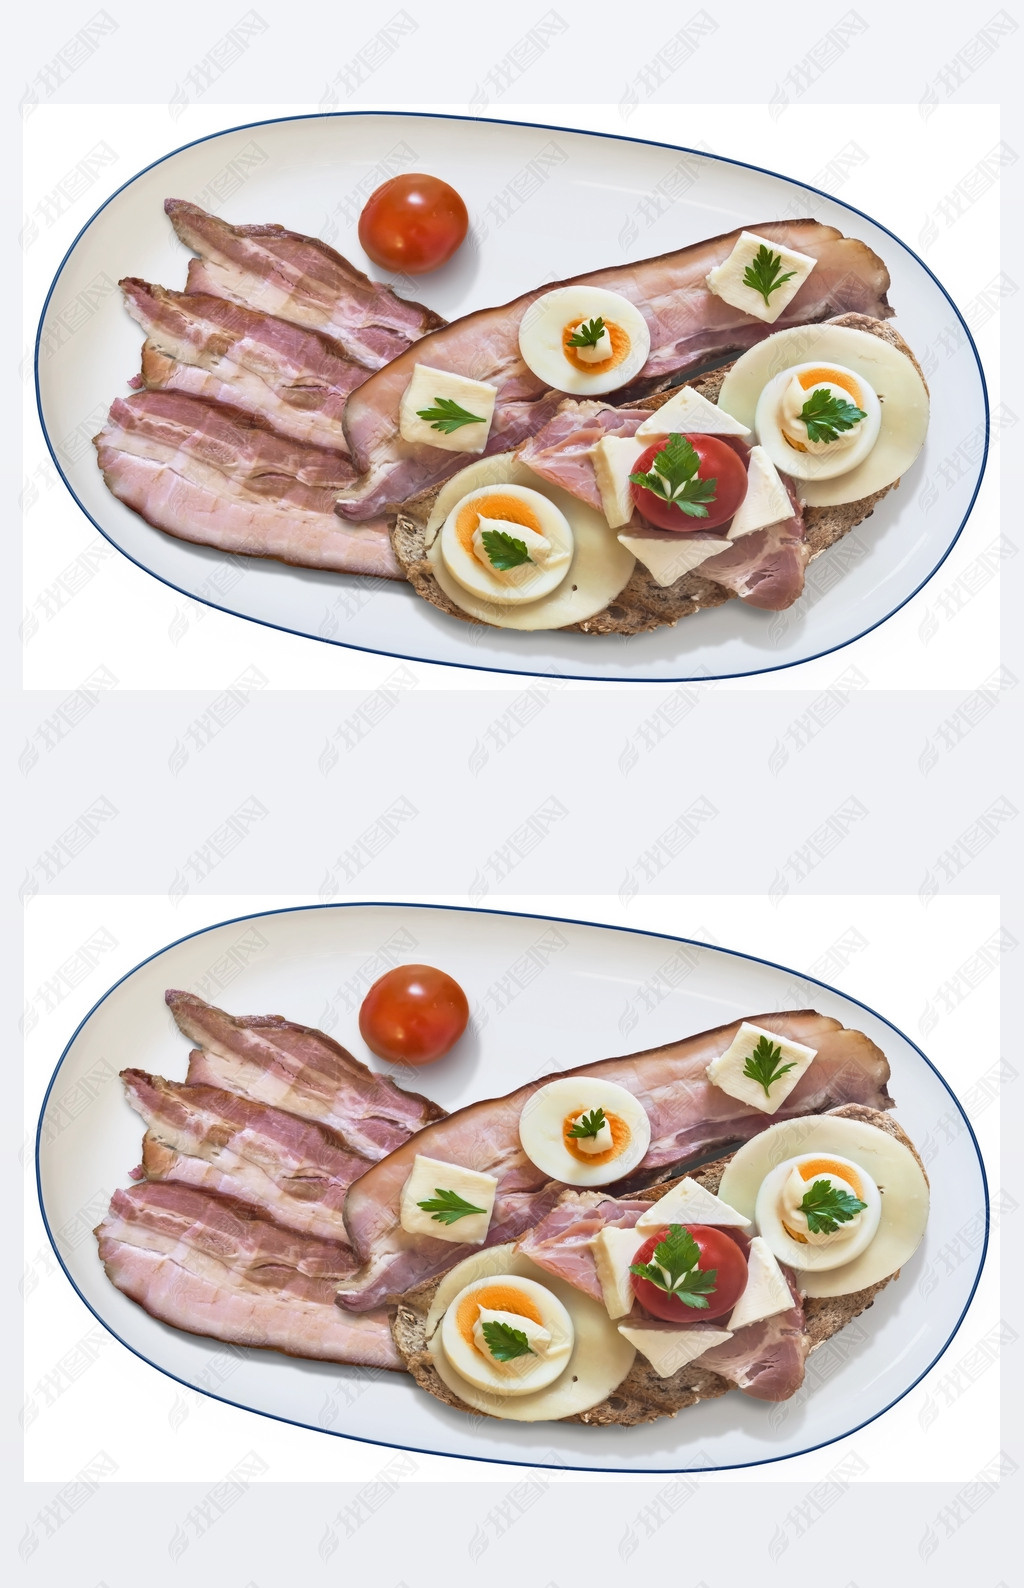 Cheese Ham Egg Sandwich with extra Bacon and Cherry Tomato on Platter Isolated on White Background